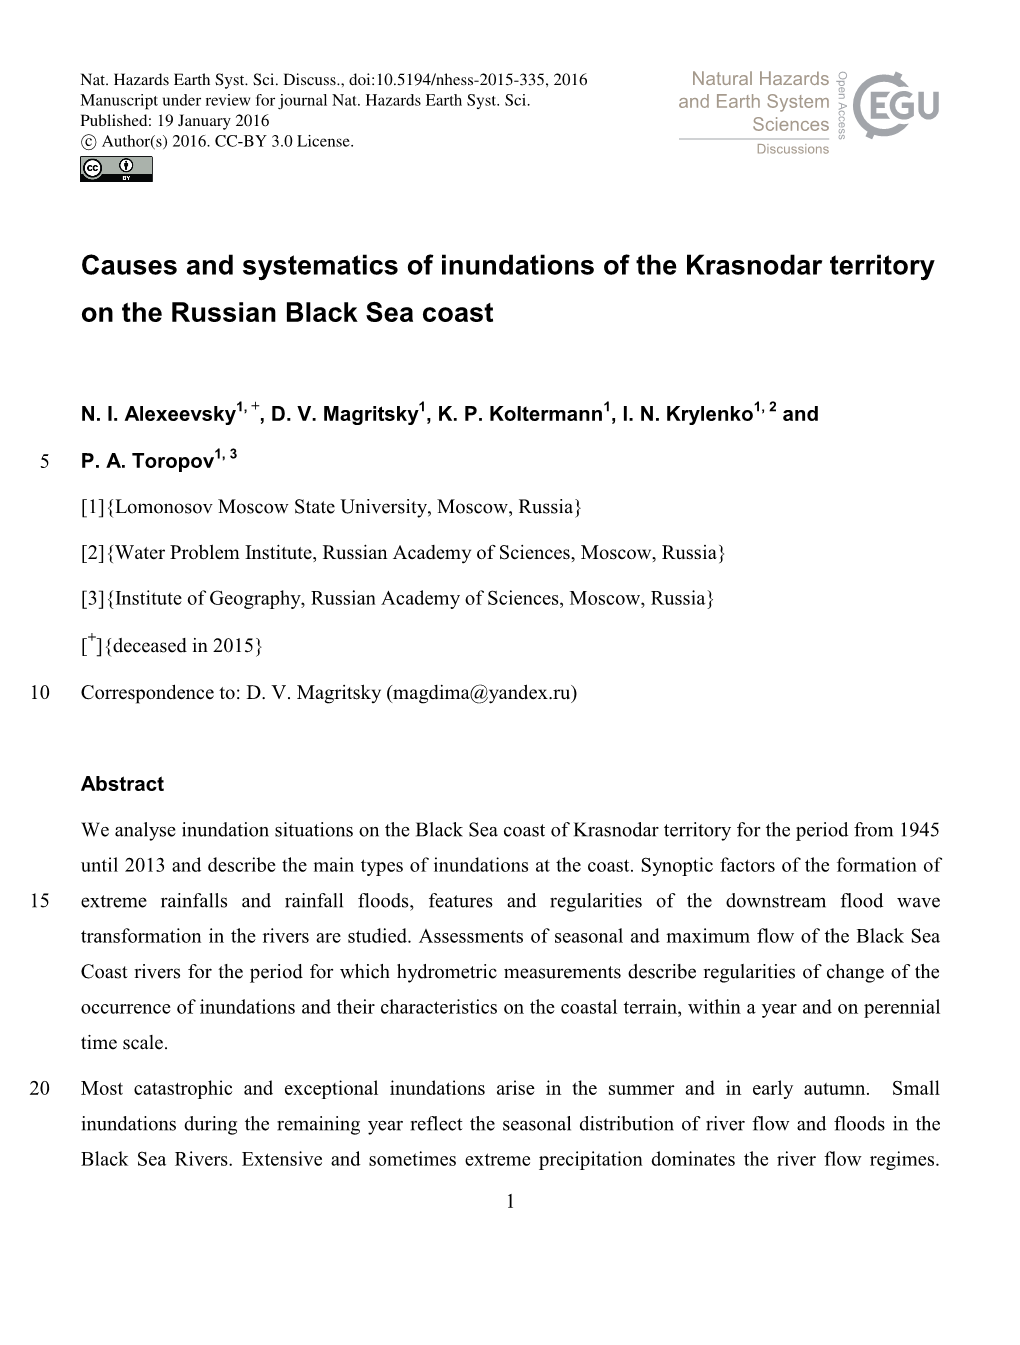 Causes and Systematics of Inundations of the Krasnodar Territory on the Russian Black Sea Coast